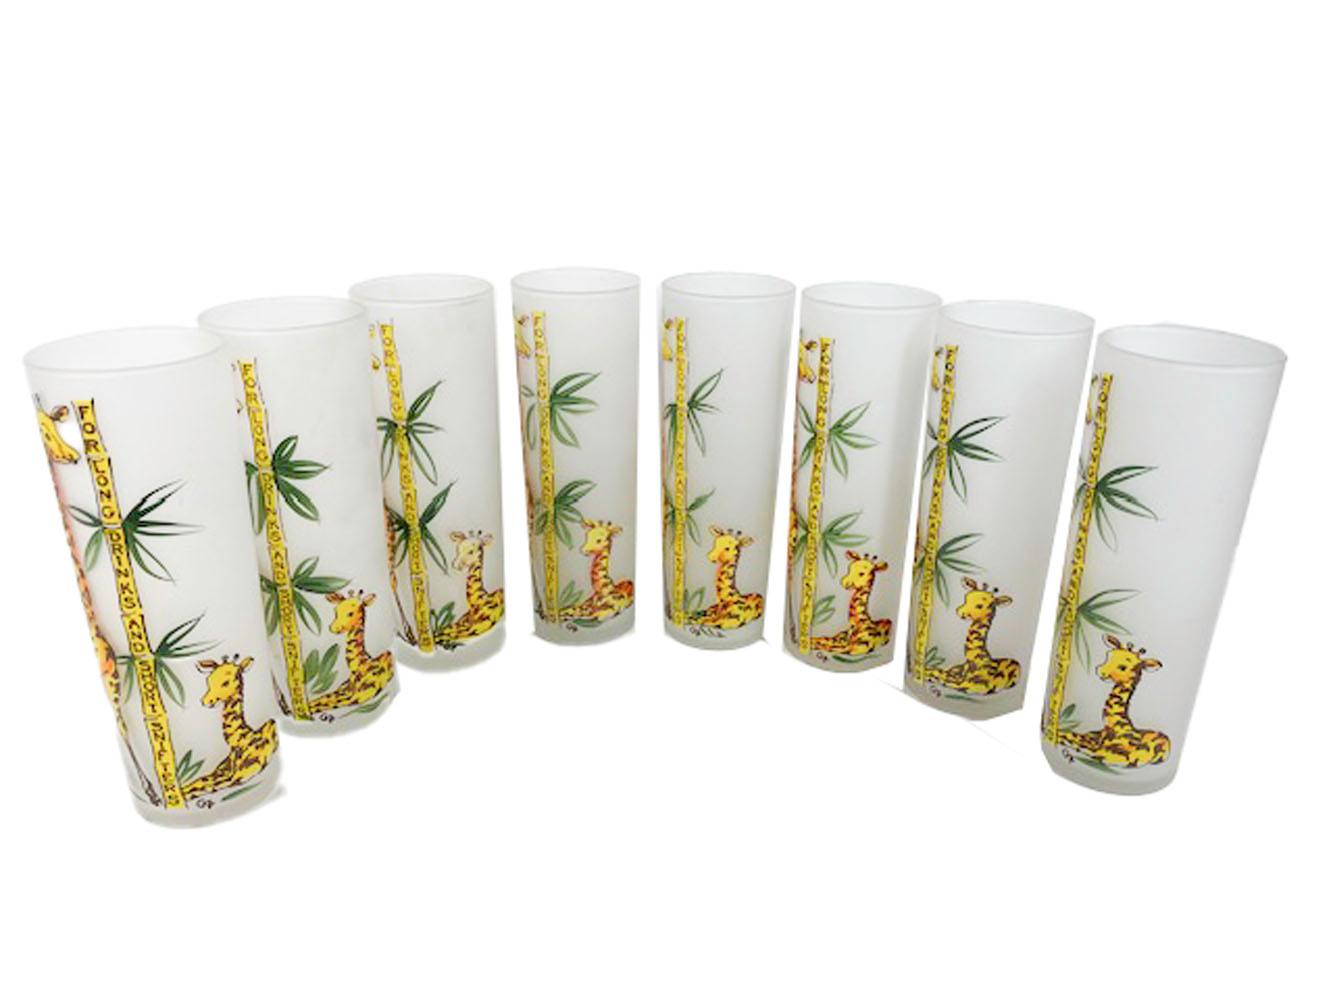 Eight vintage Tiki / Zombie cocktail glasses hand painted by Gay Fad with an adult giraffe and a young giraffe on either side of a stalk of bamboo inscribed 